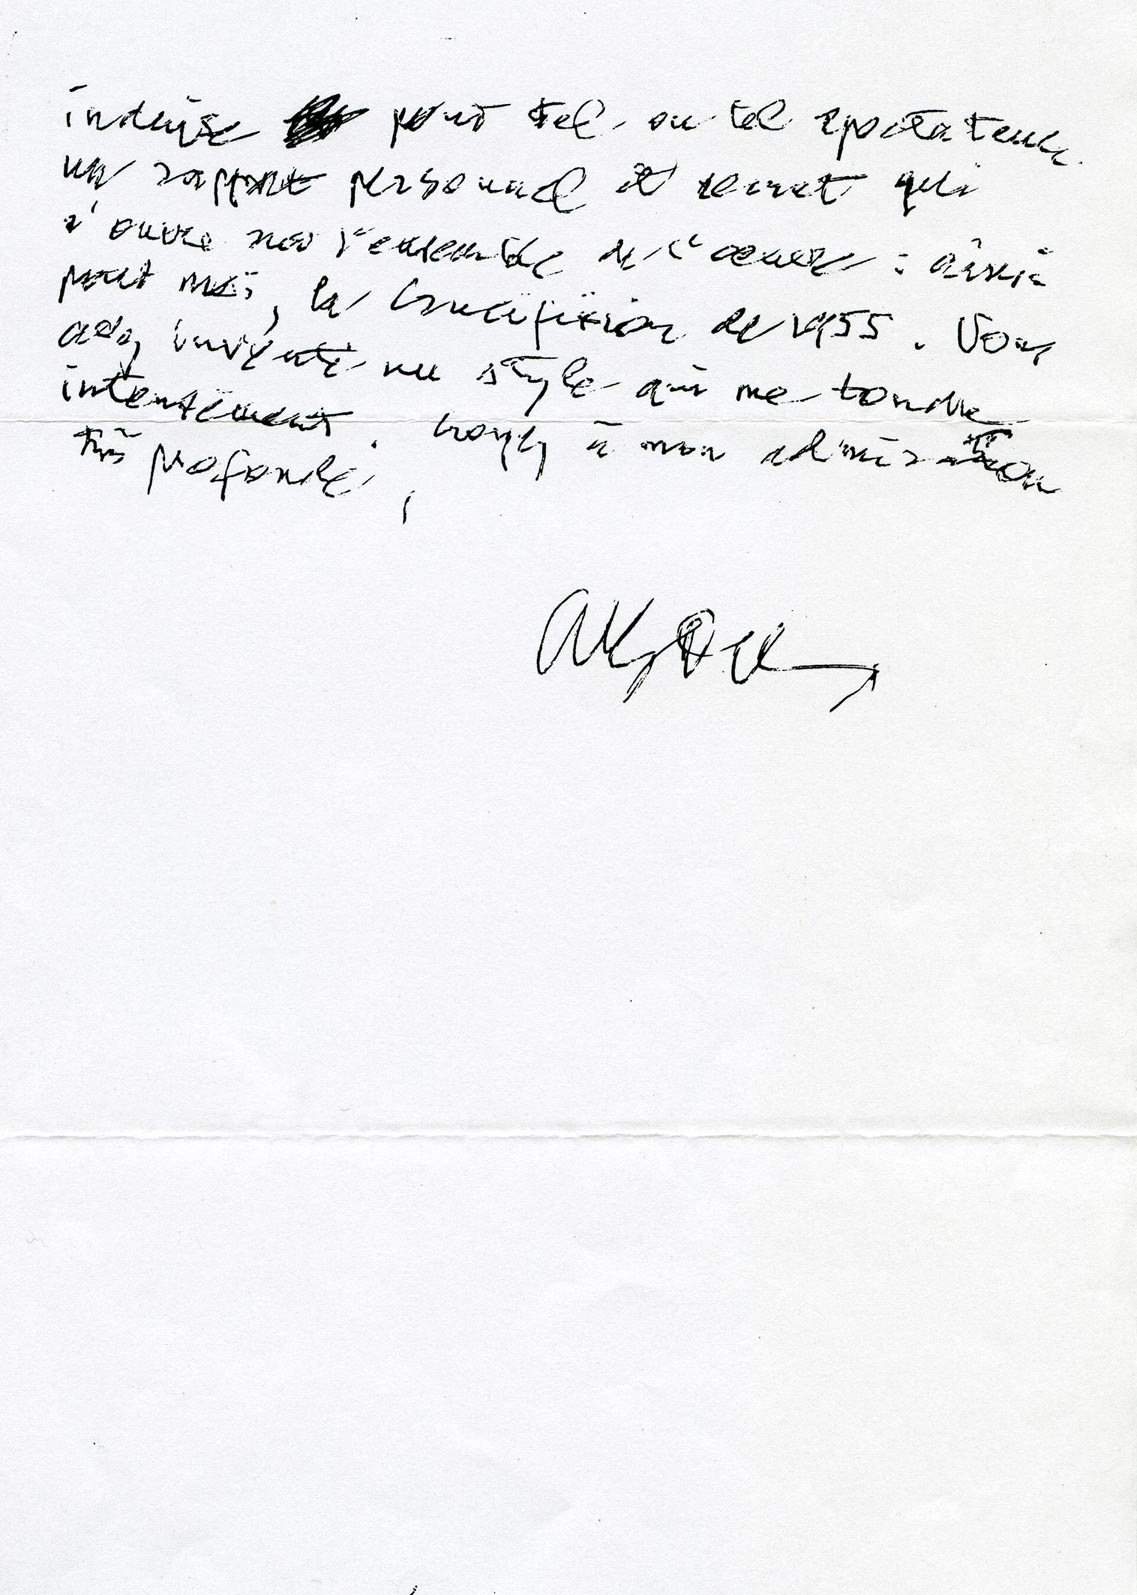 letter addressed by Gilles Deleuze to Dado